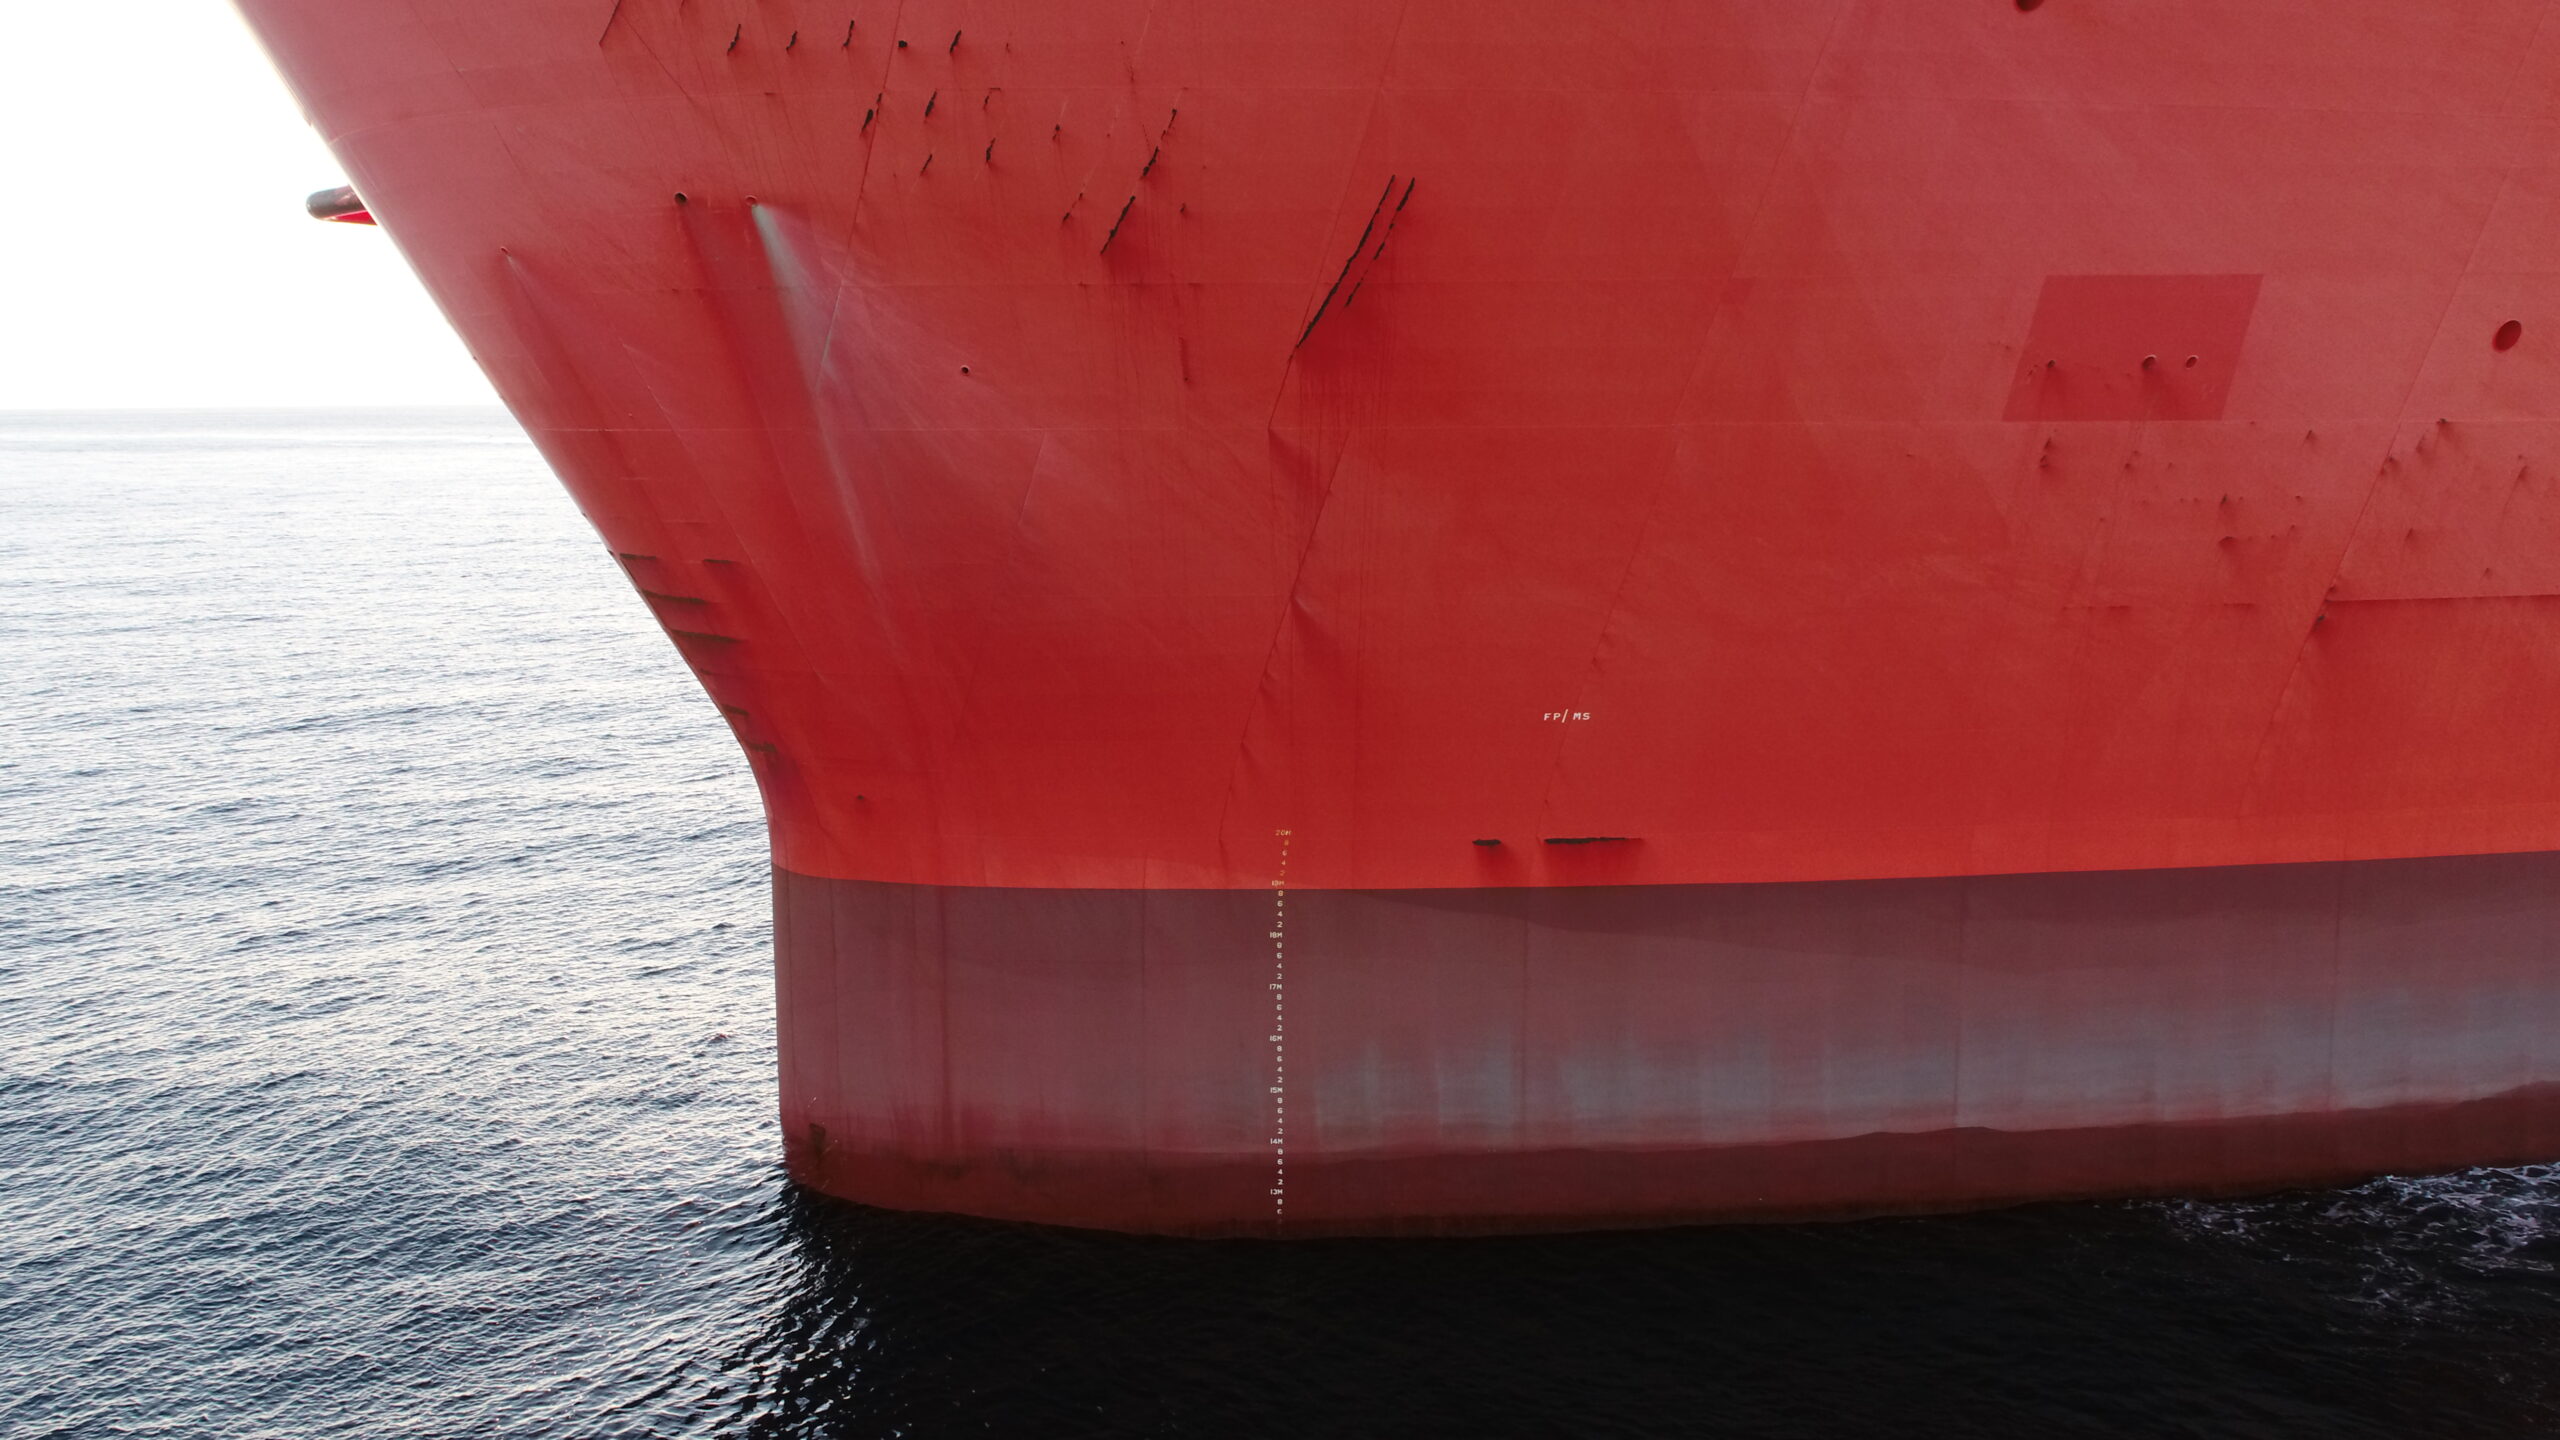 Hull captured by Axess’ drone during inspection